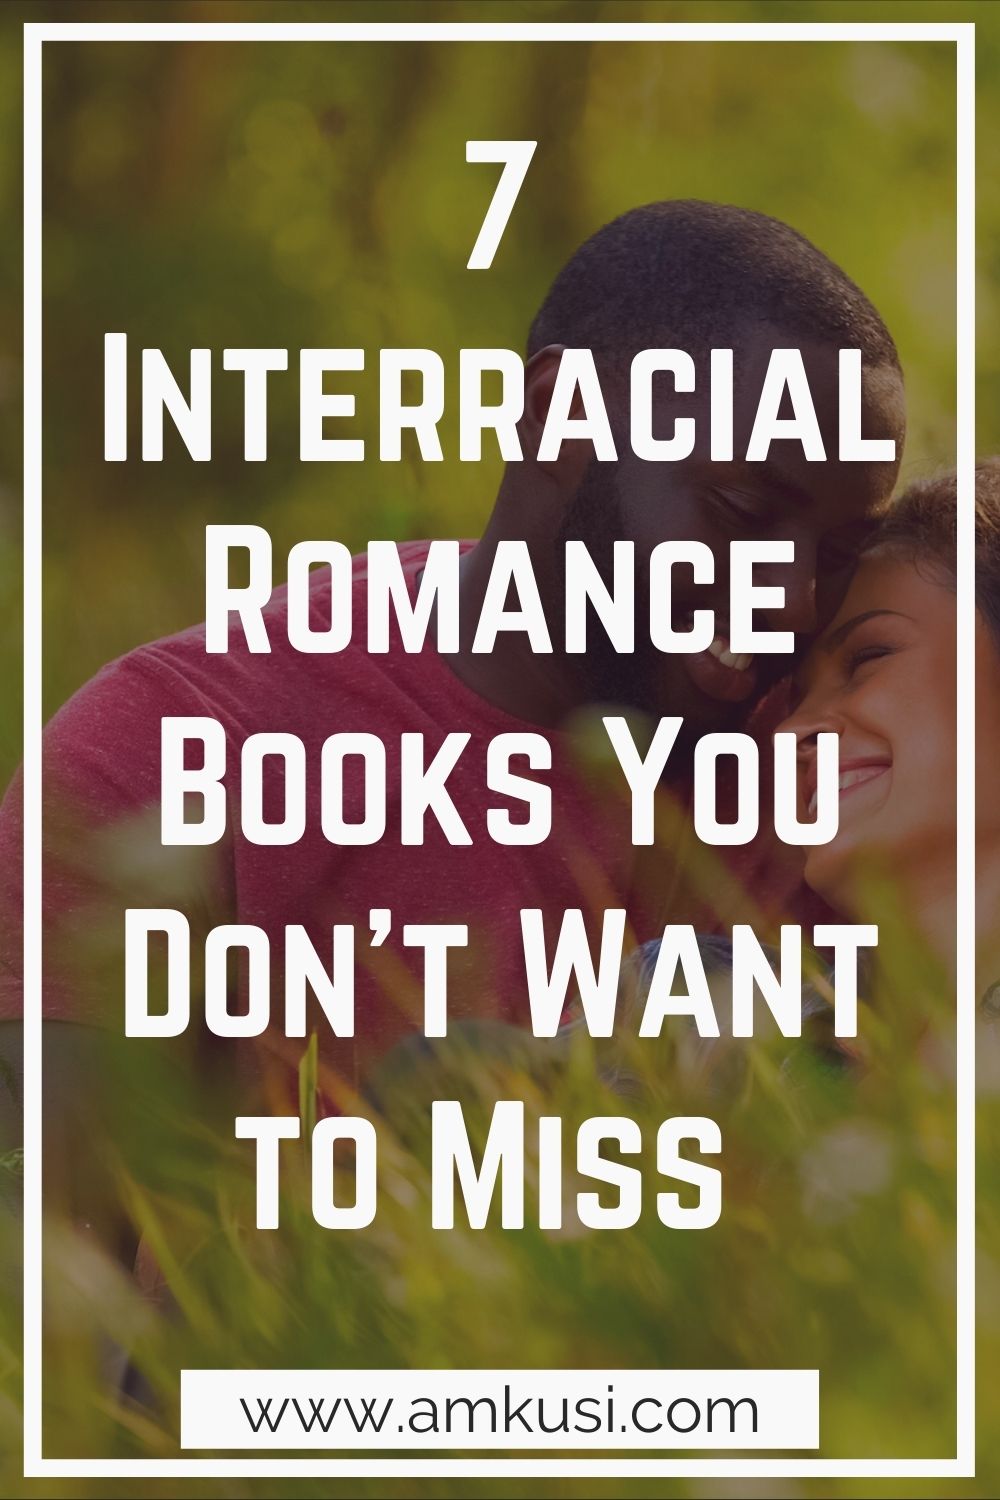 10 Interracial Romance Books You Don\'t Want to Miss